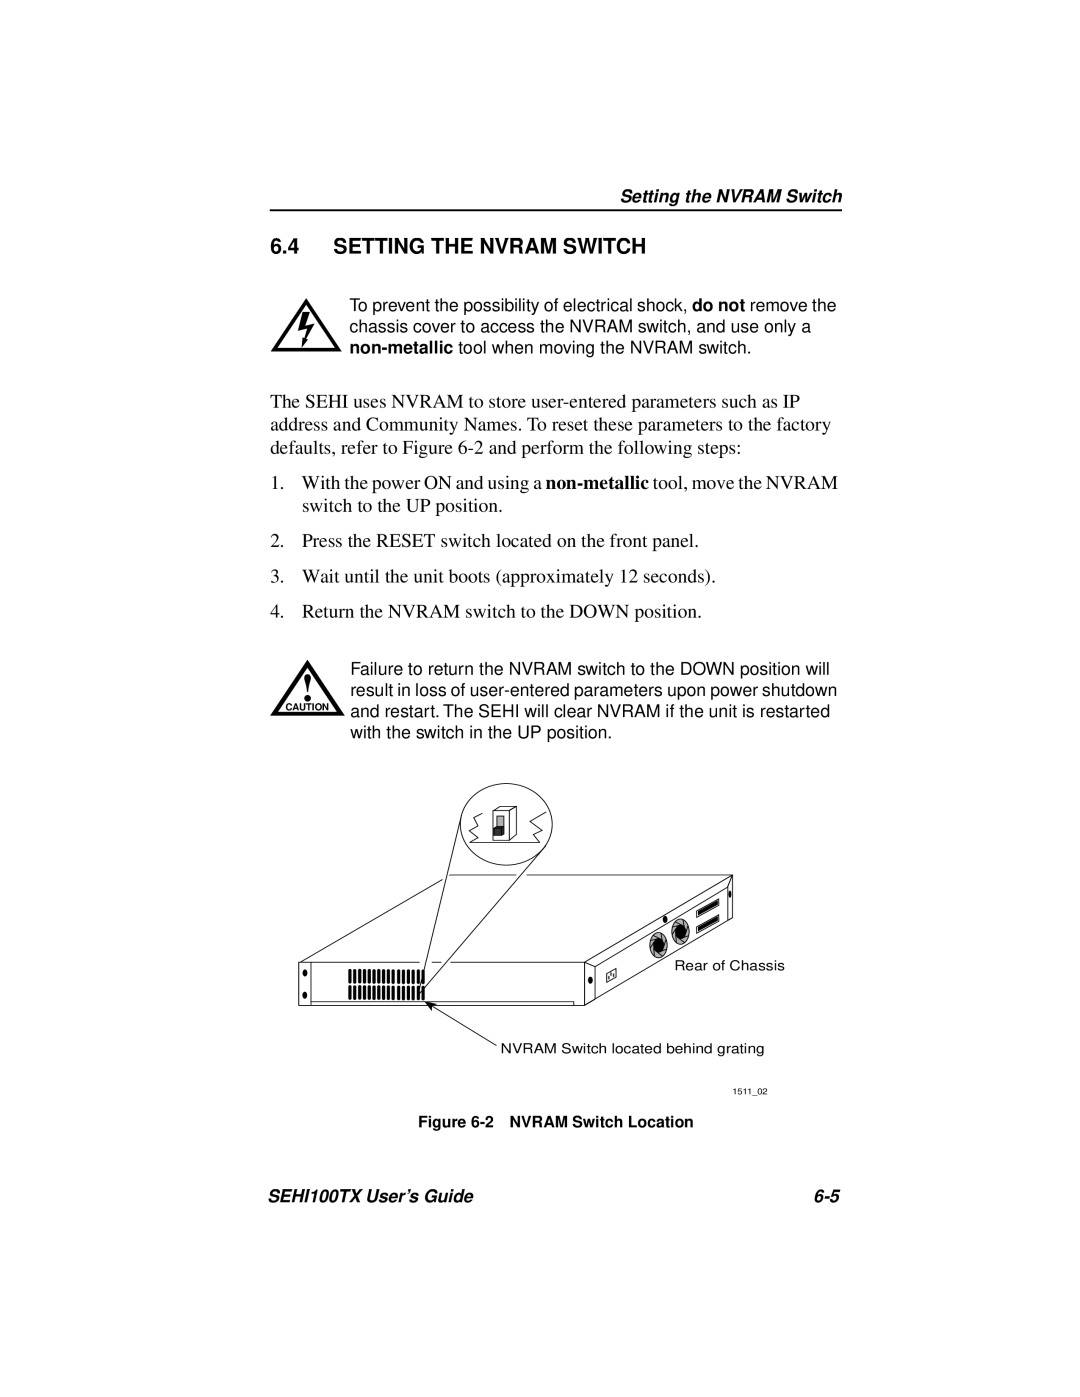 Cabletron Systems SEHI100TX-22 manual Setting The Nvram Switch 